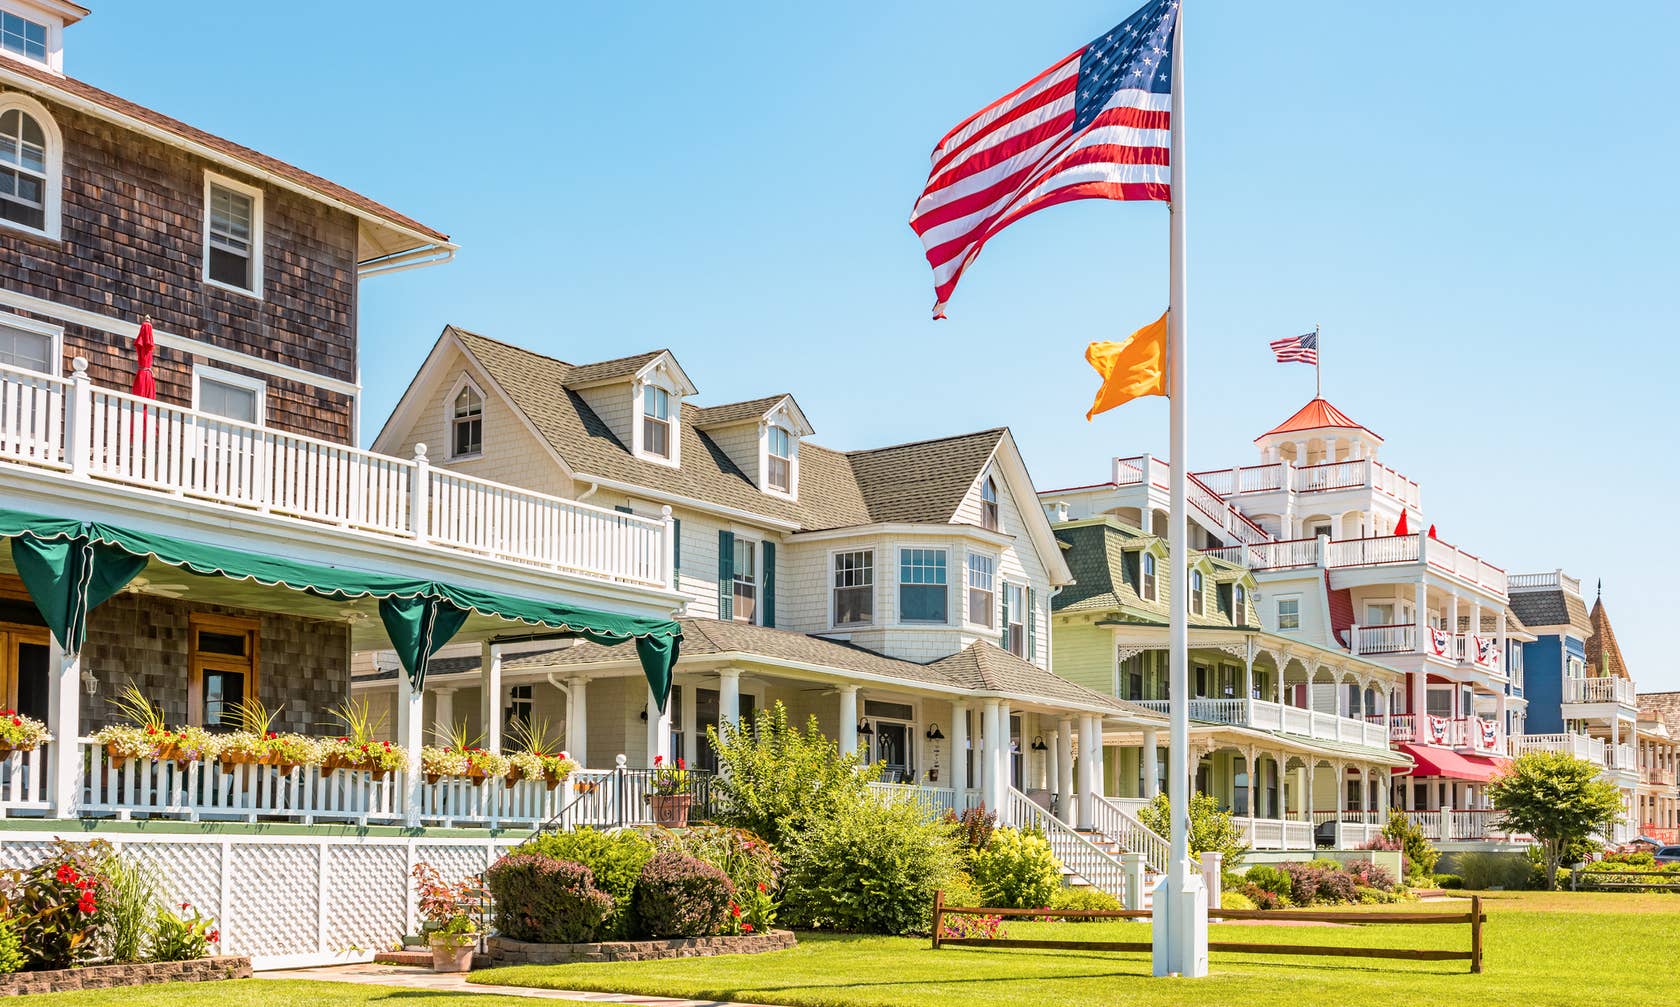 Holiday rentals in Cape May